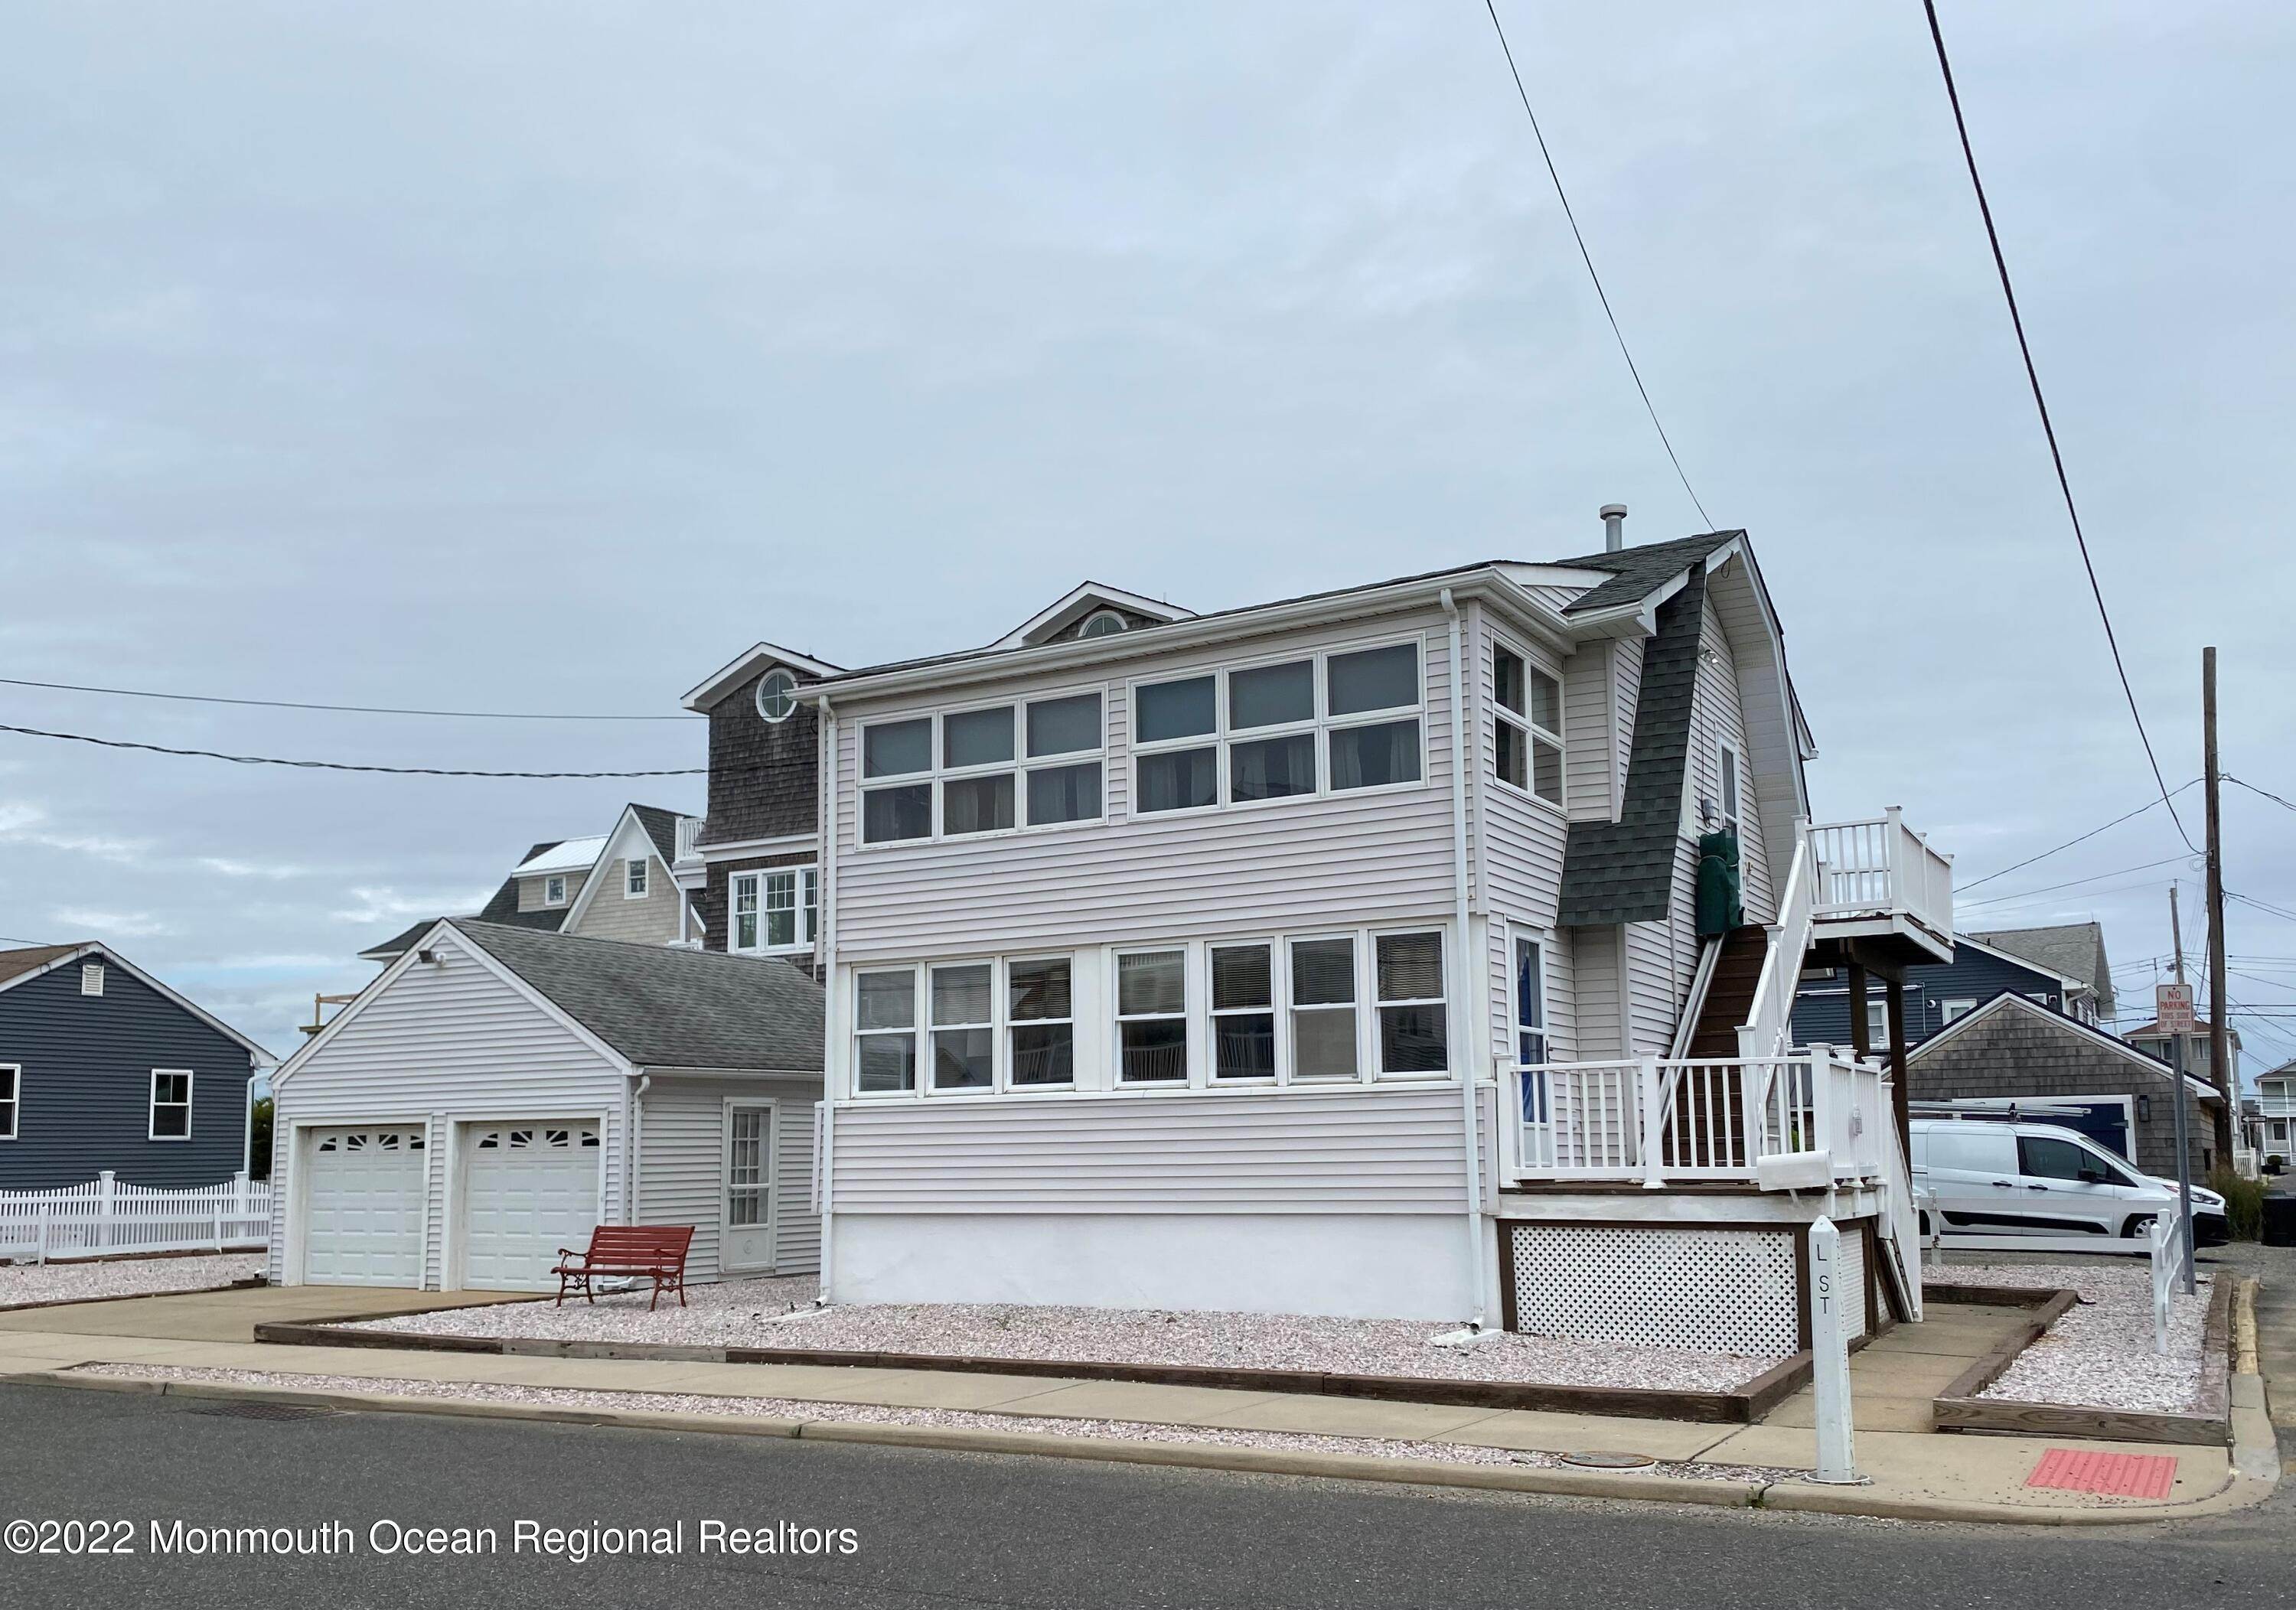 Property for Sale at 1201 Berkeley Lane Seaside Park, New Jersey 08752 United States